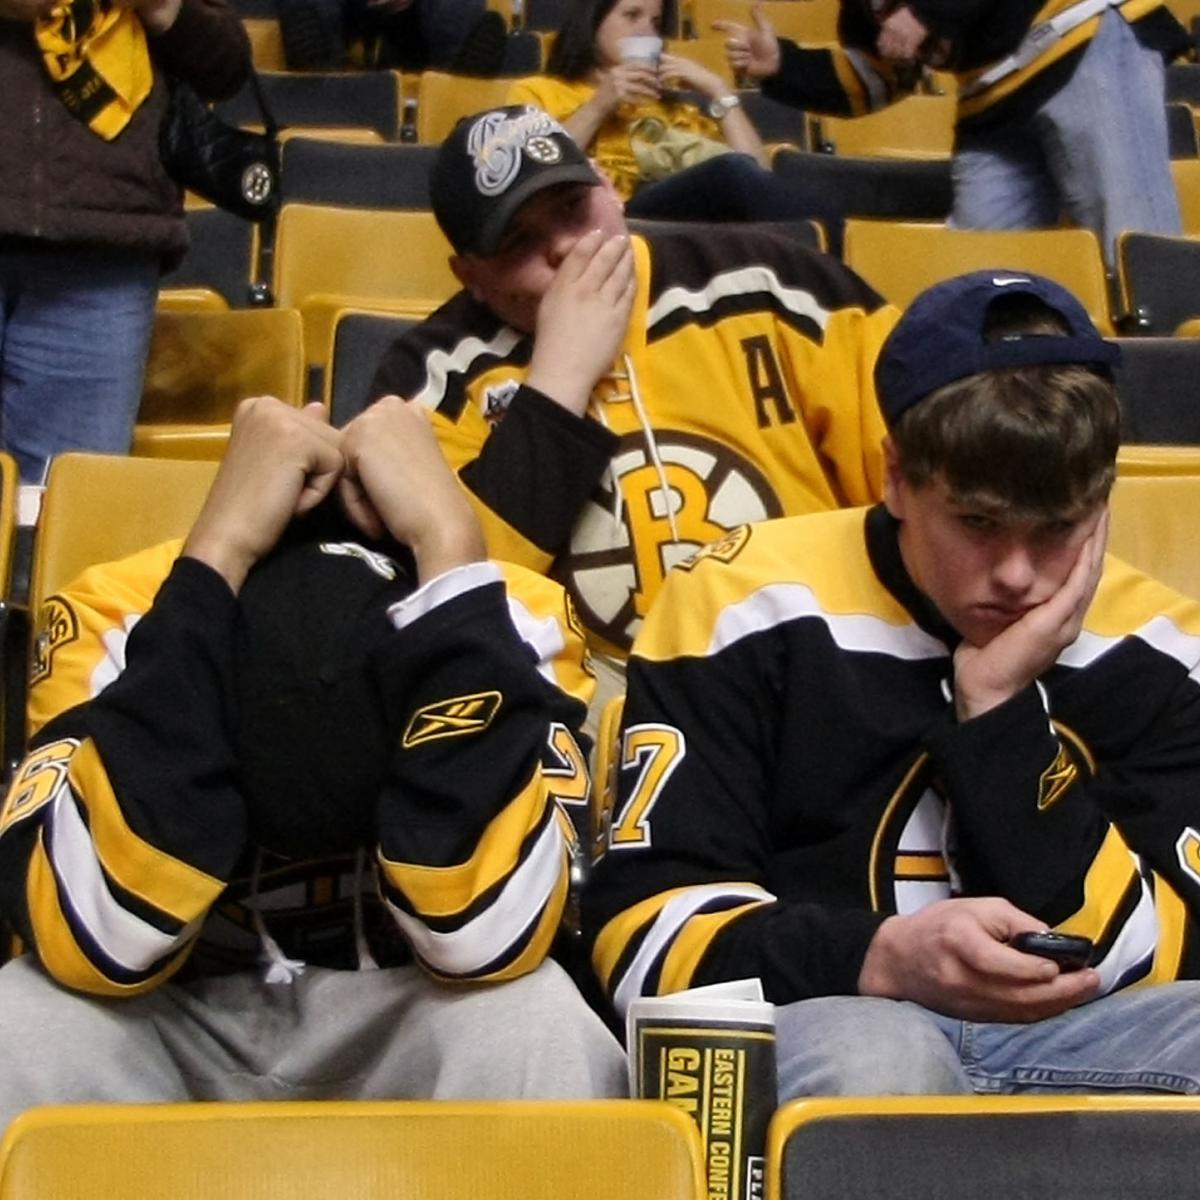 Look How Sad Boston Fans Were After Another One of Their Teams Collapsed